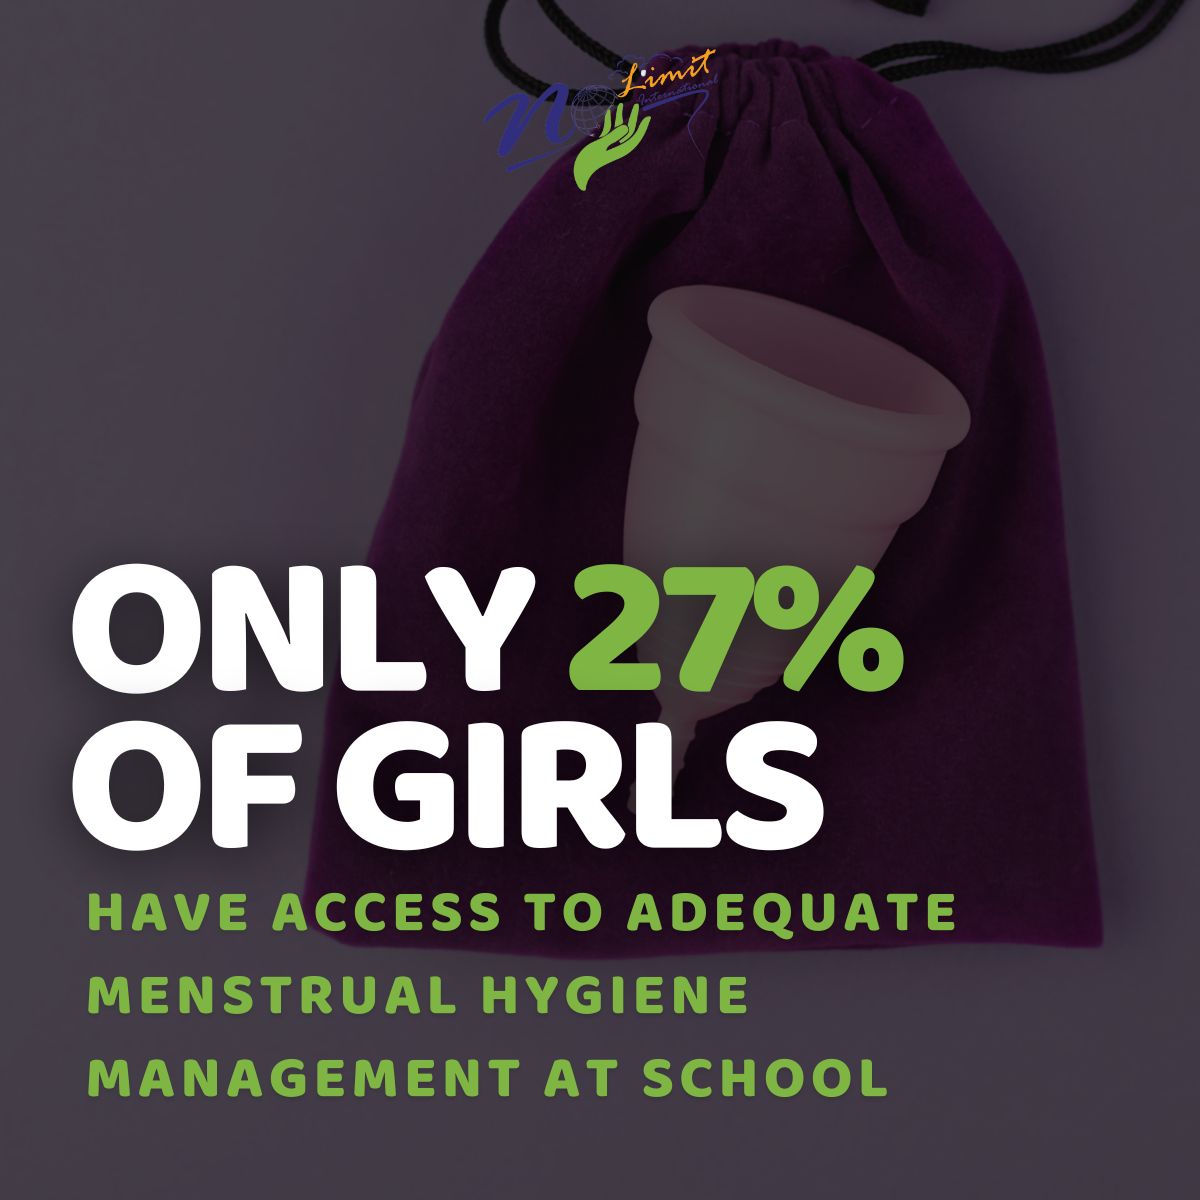 In low-income countries, only 27% of girls have access to adequate menstrual hygiene management at school Learn more: nolimitinternational.org/donat.../donat… #MenstrualHealth #EmpowerWomen